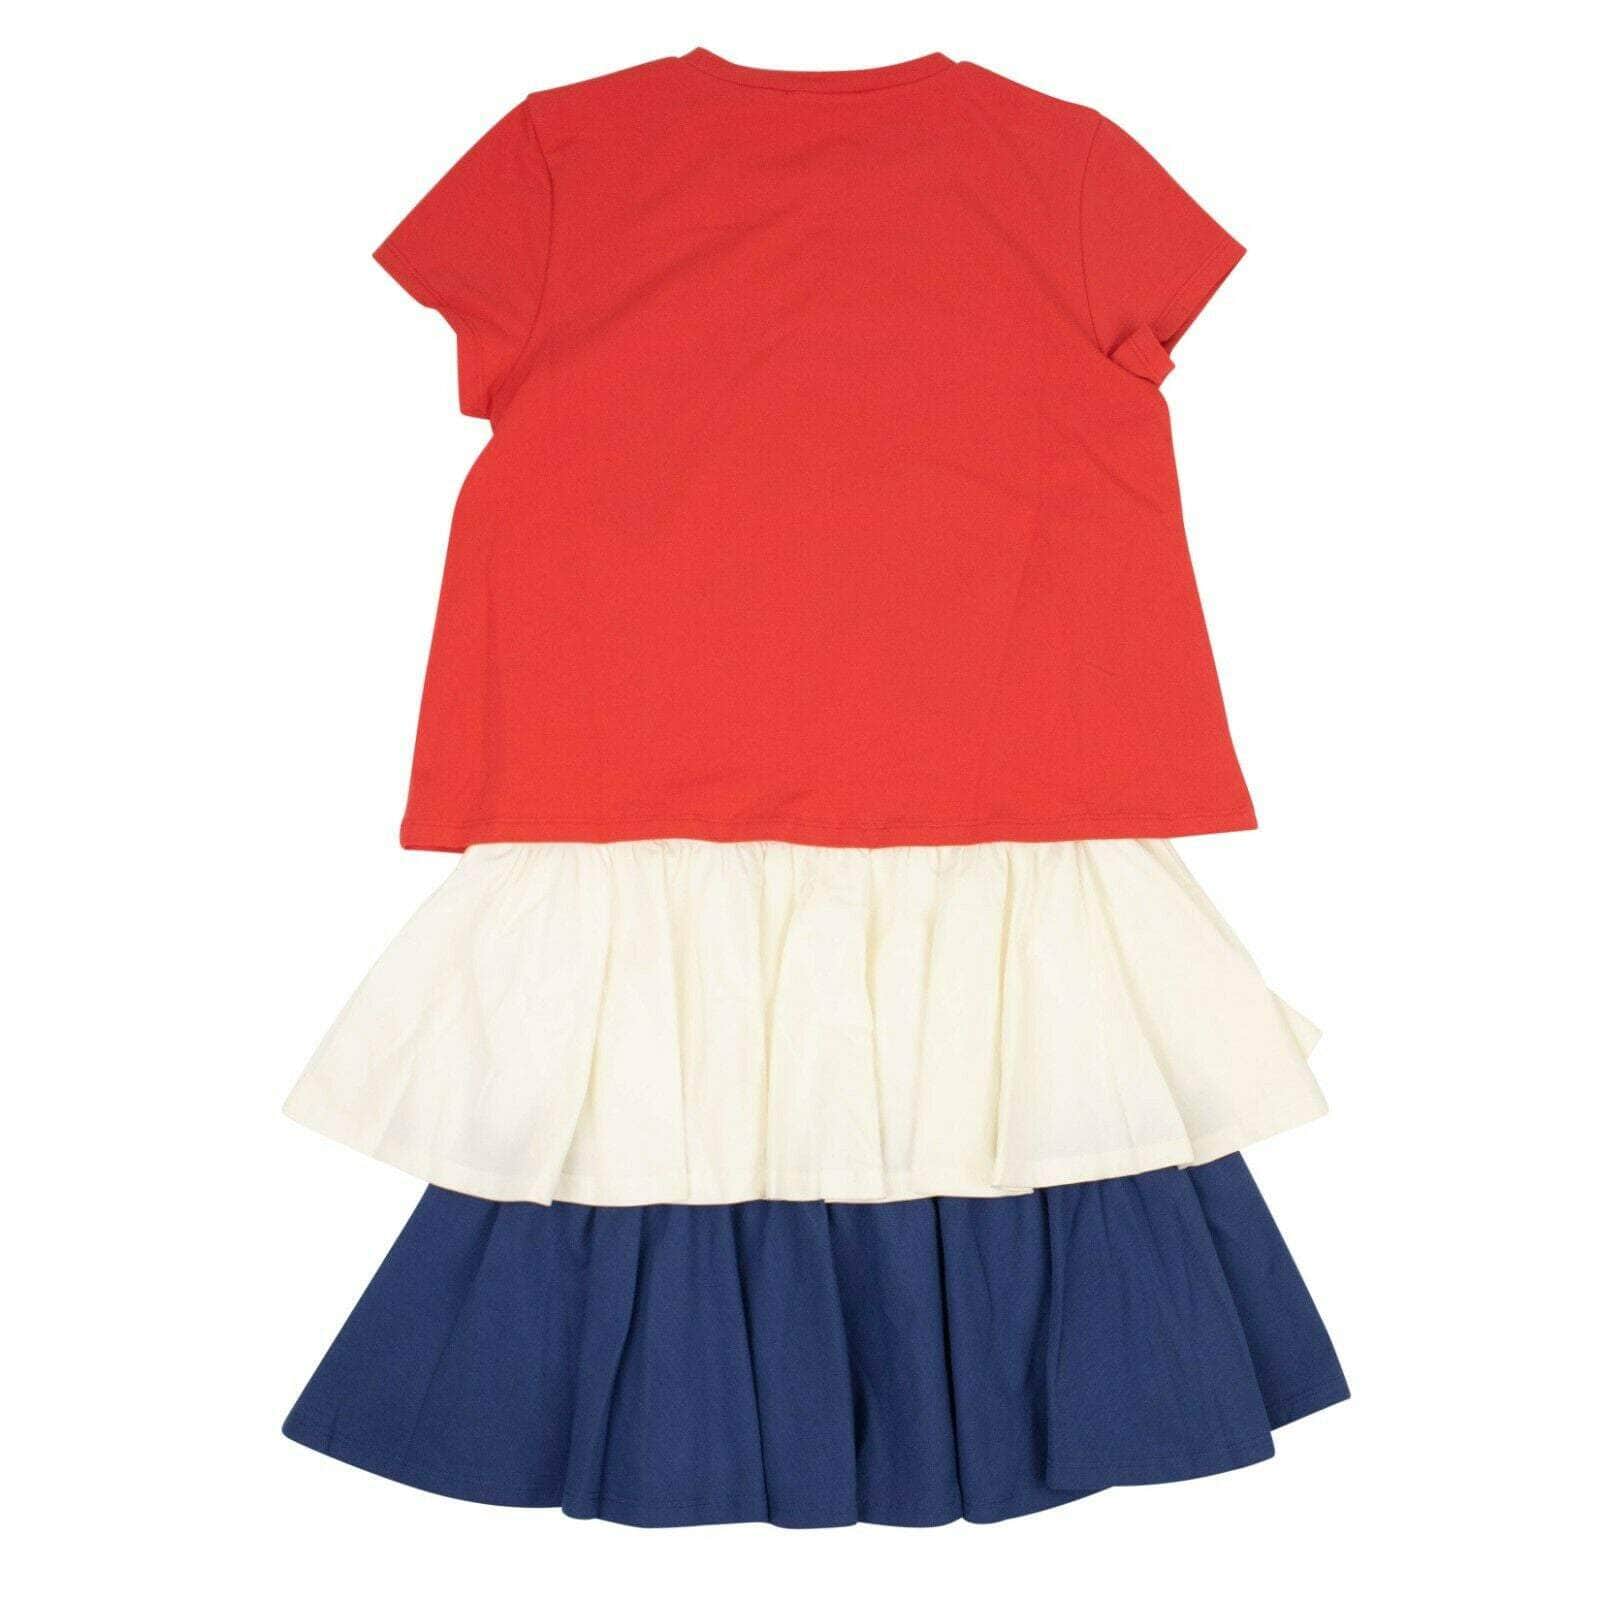 Moncler channelenable-all, chicmi, couponcollection, gender-womens, girls-dresses, main-clothing, moncler, size-10, size-12, size-14, size-8, under-250 Red Layered Ruffle Kids Dress